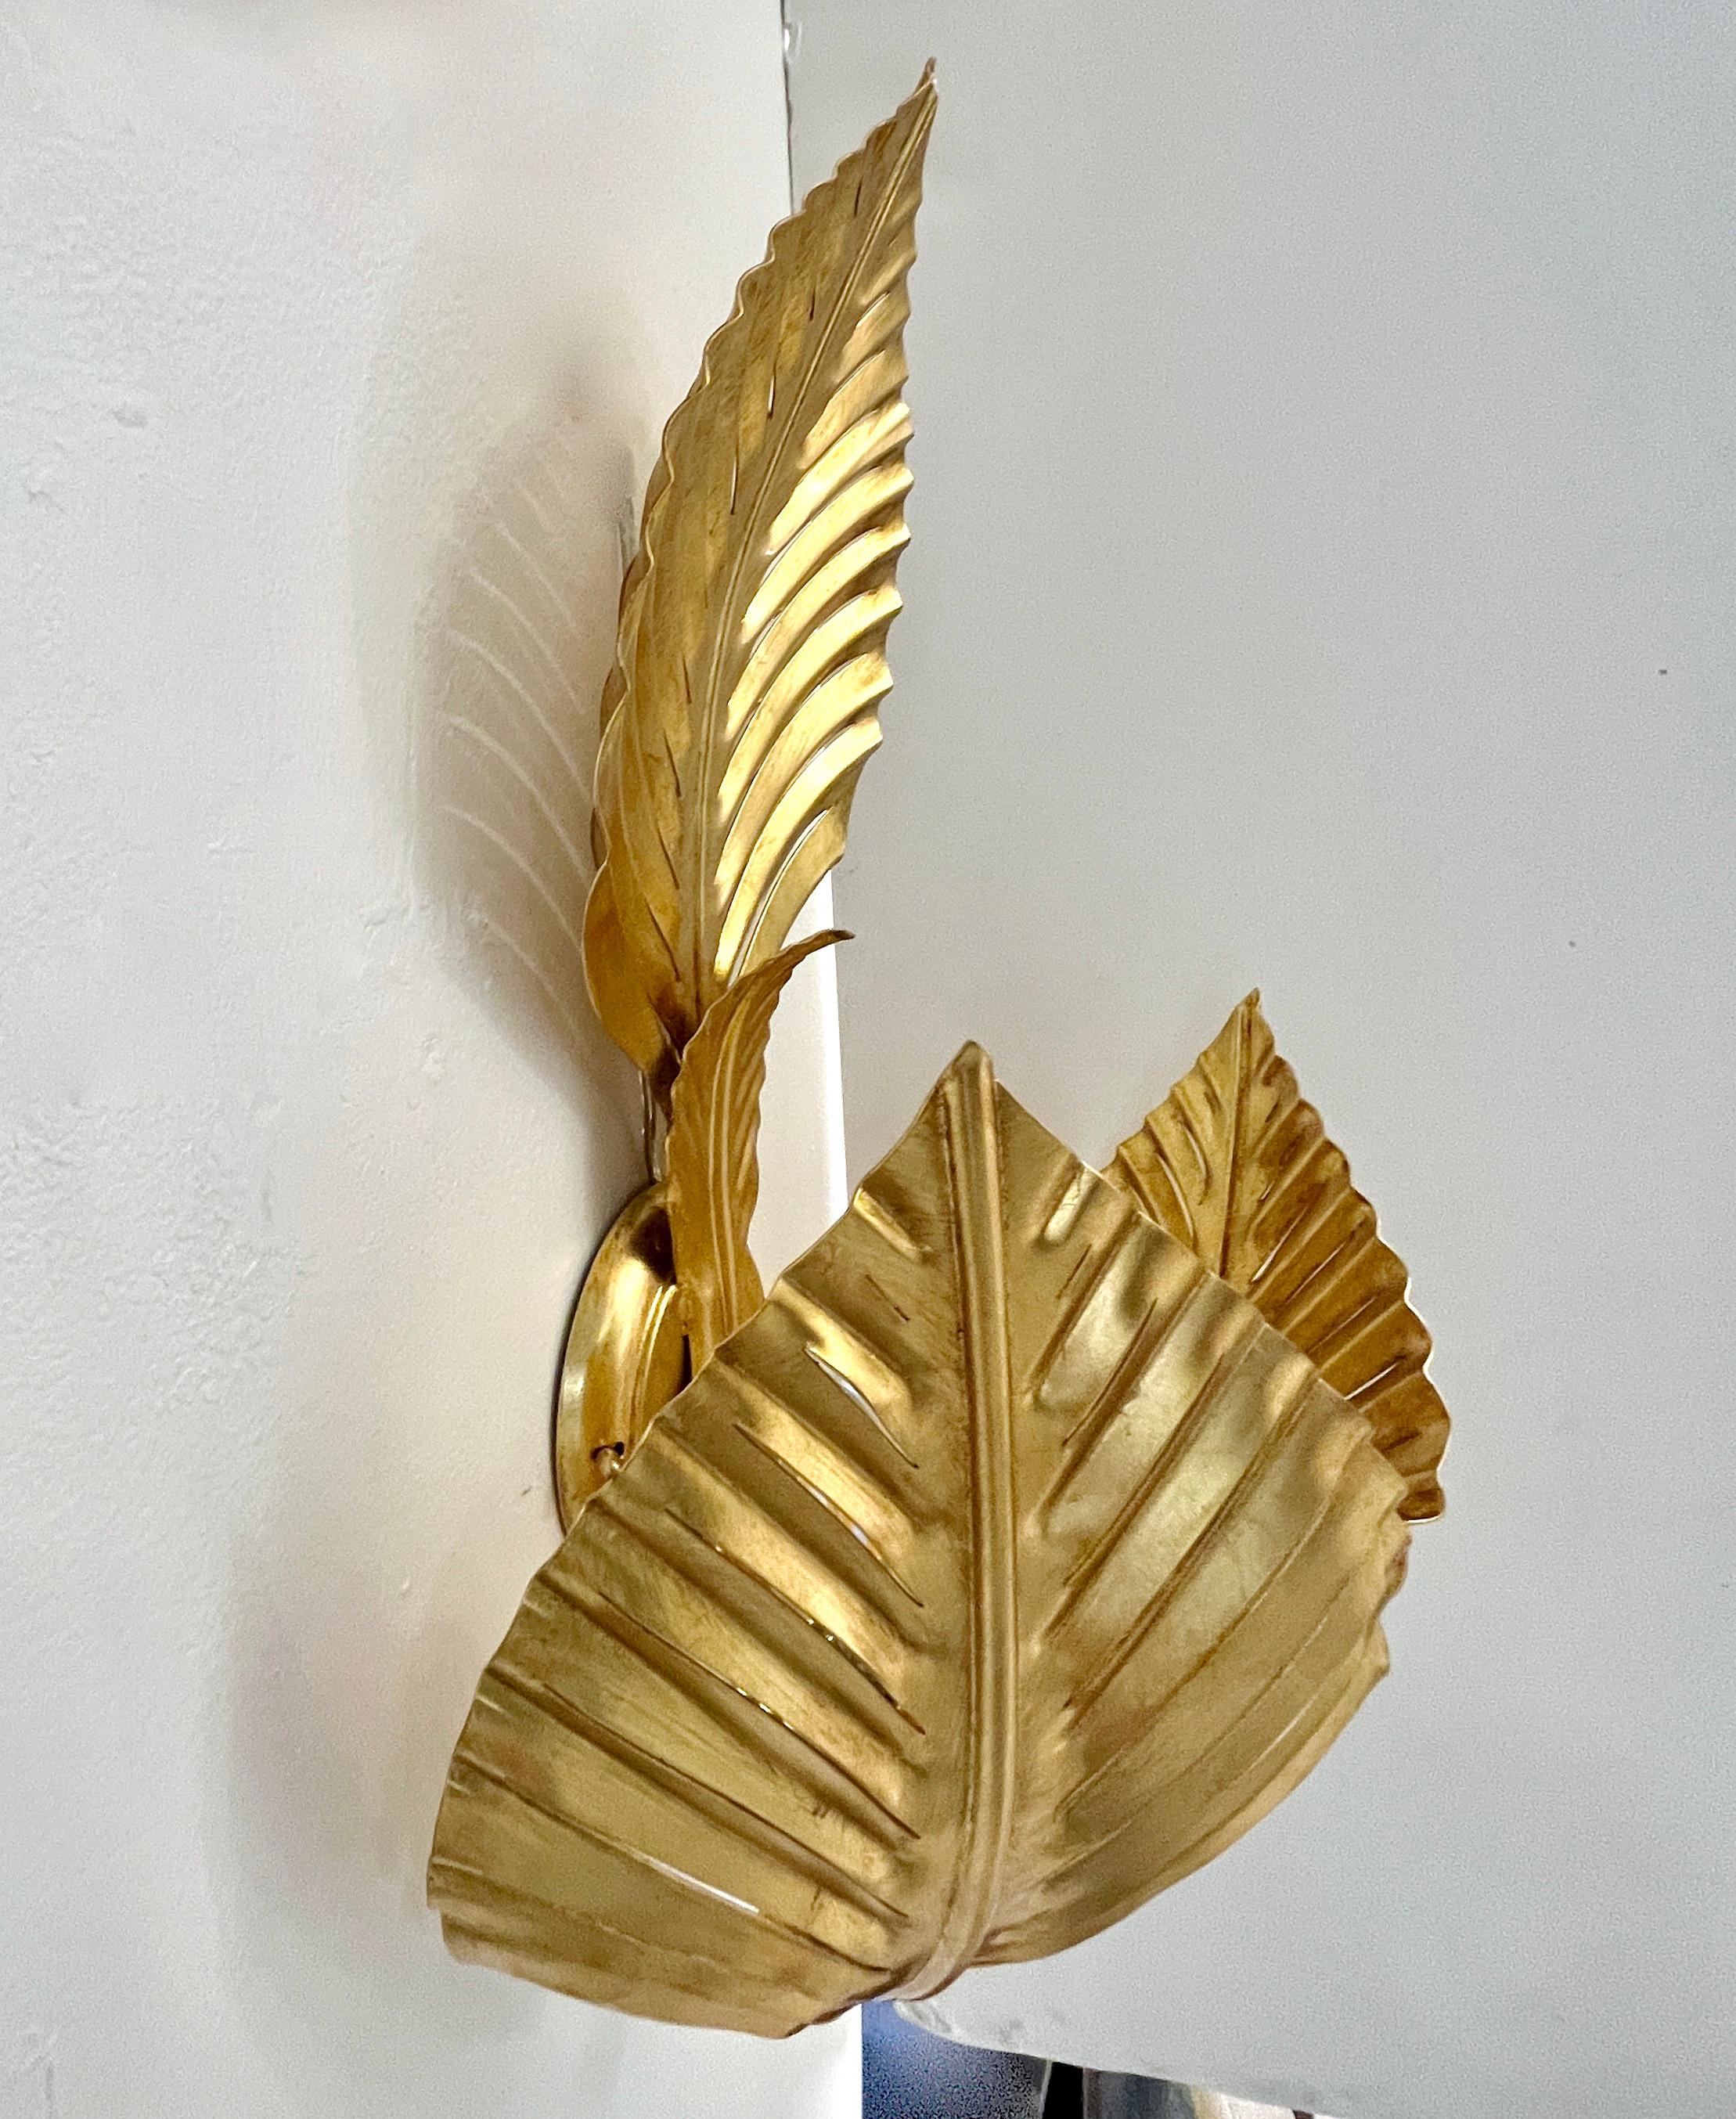 Contemporary Italian Art Deco Design Pair of Hand Made Gold Metal 3-Leaf Sconces For Sale 6